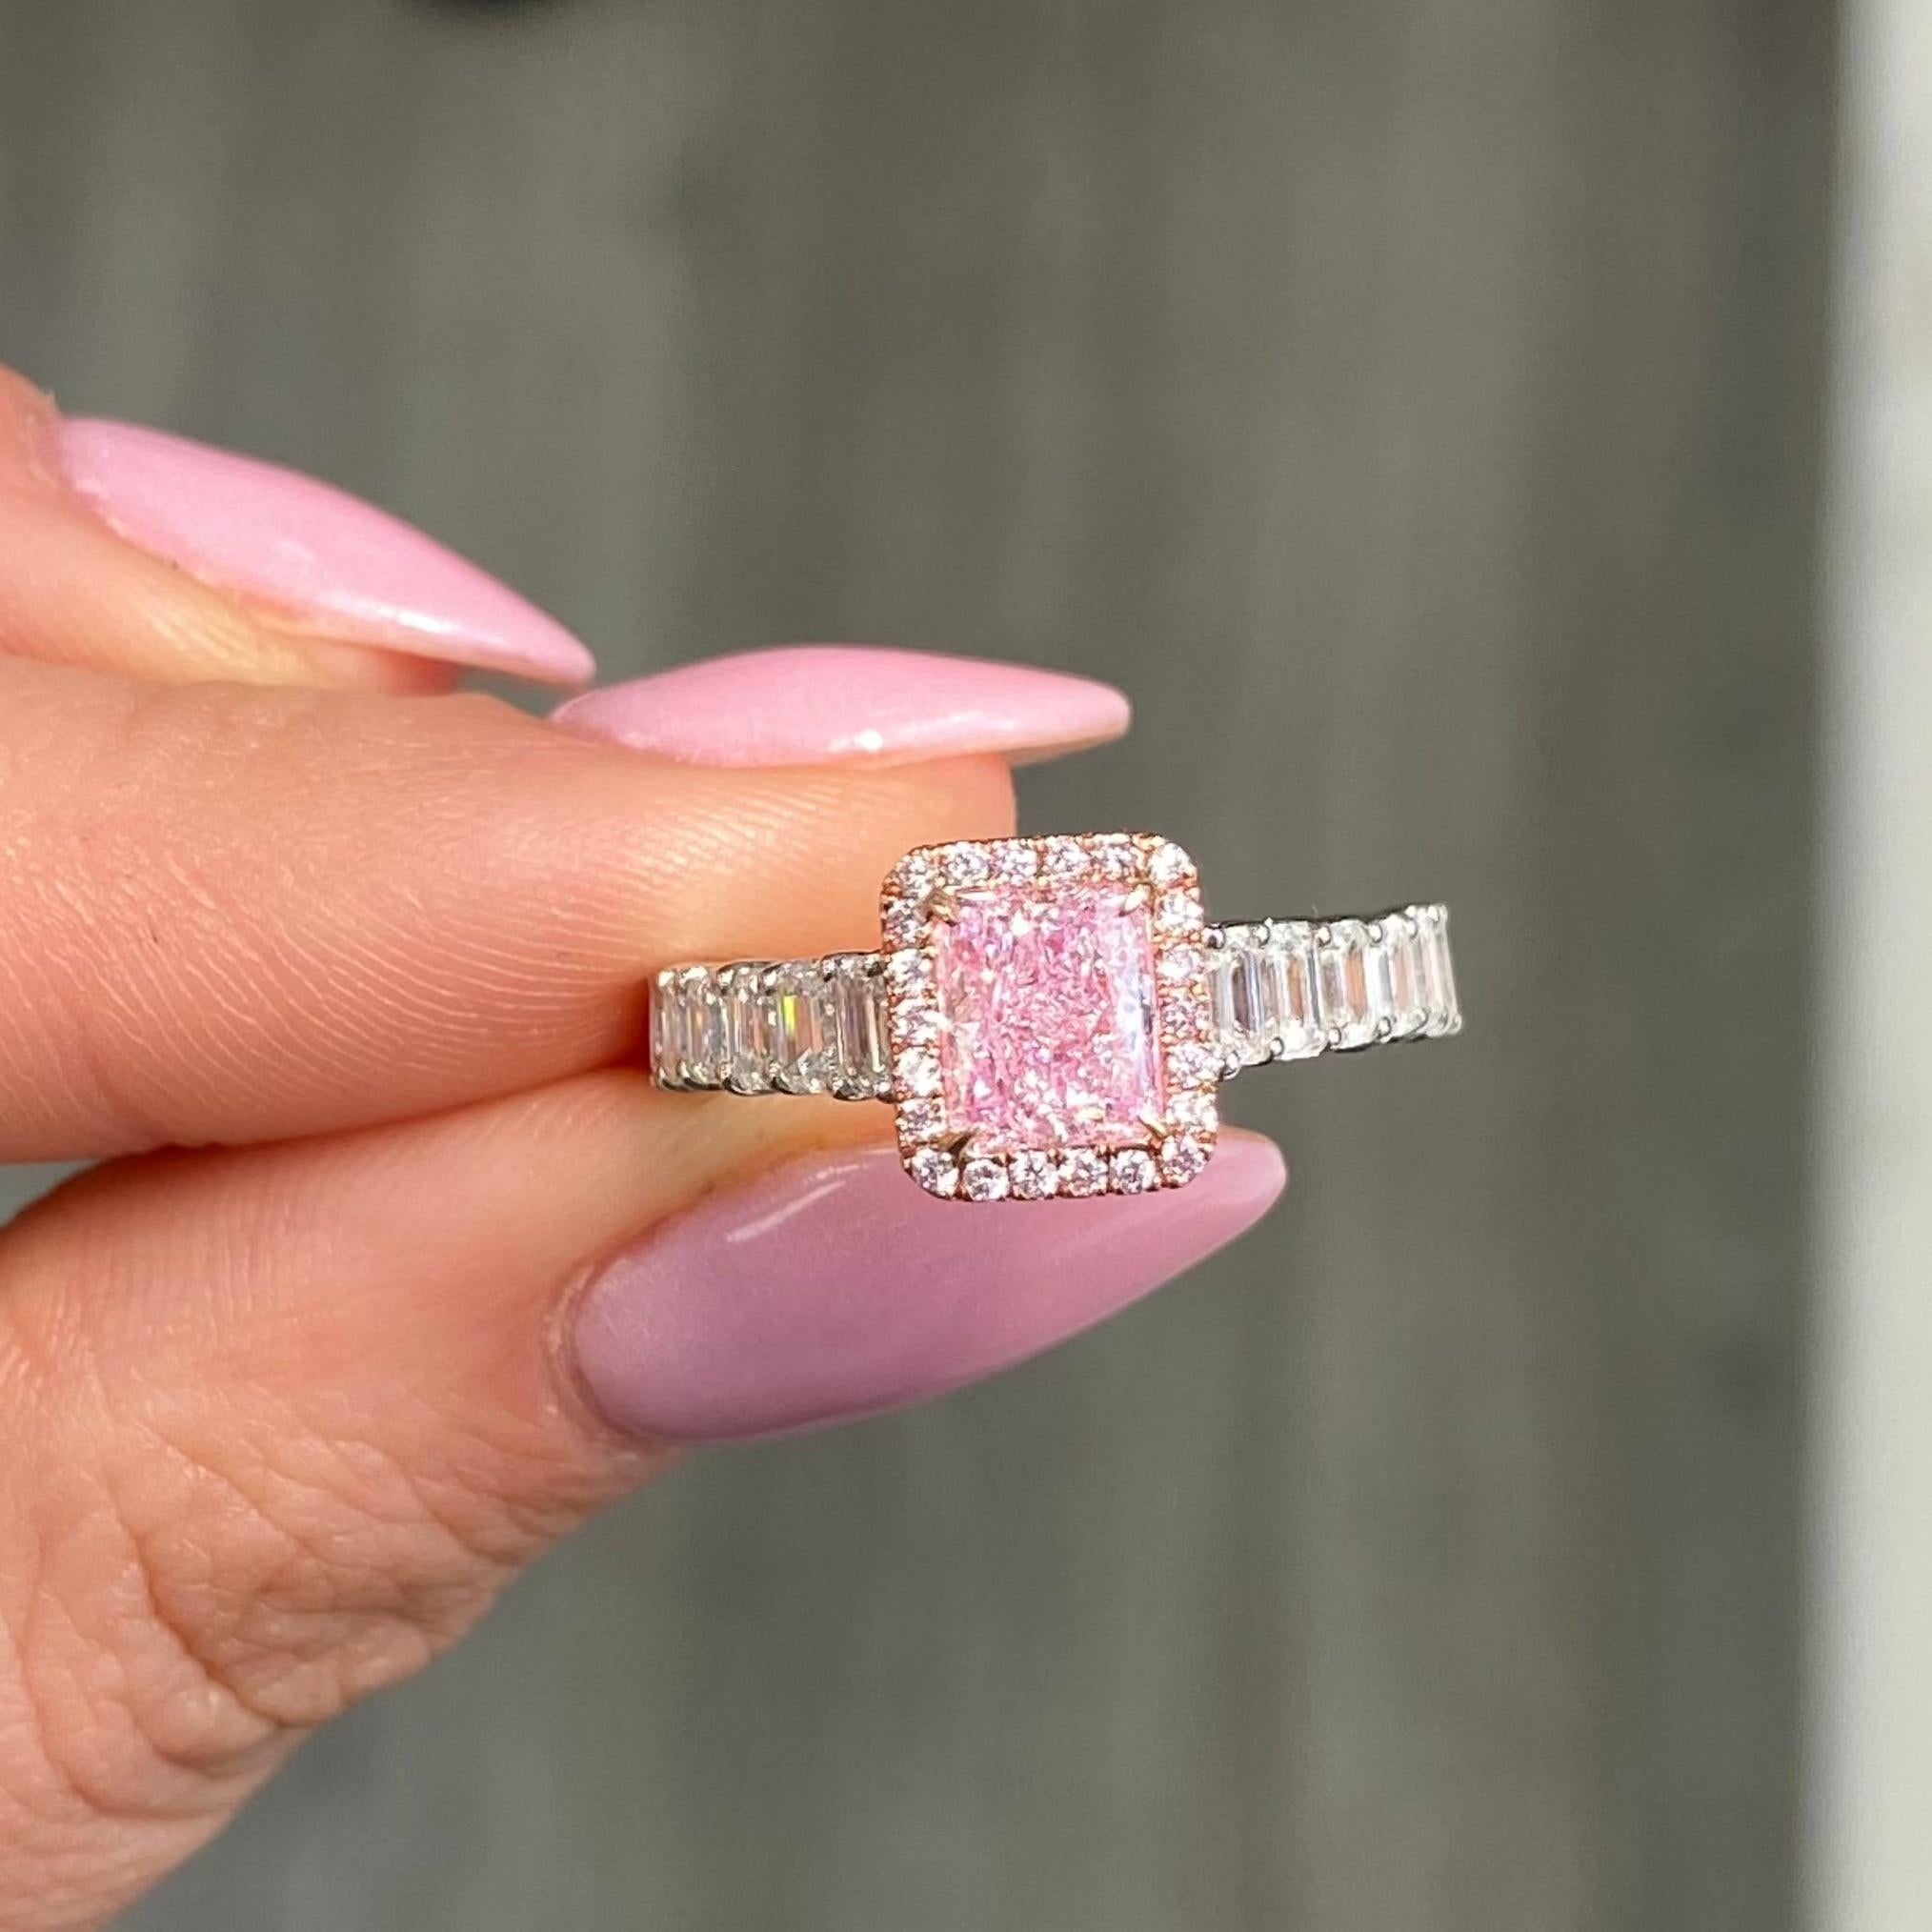 1.09 Carat Center Diamond
Light Pink Elongated Radiant
VS2 Clarity
Excellent, Very Good Cutting
GIA Certified Pink Diamond
Surrounded by 1.33 Carats of natural white diamonds
Set in 18k White Gold
Handmade in NYC

This piece can be viewed before